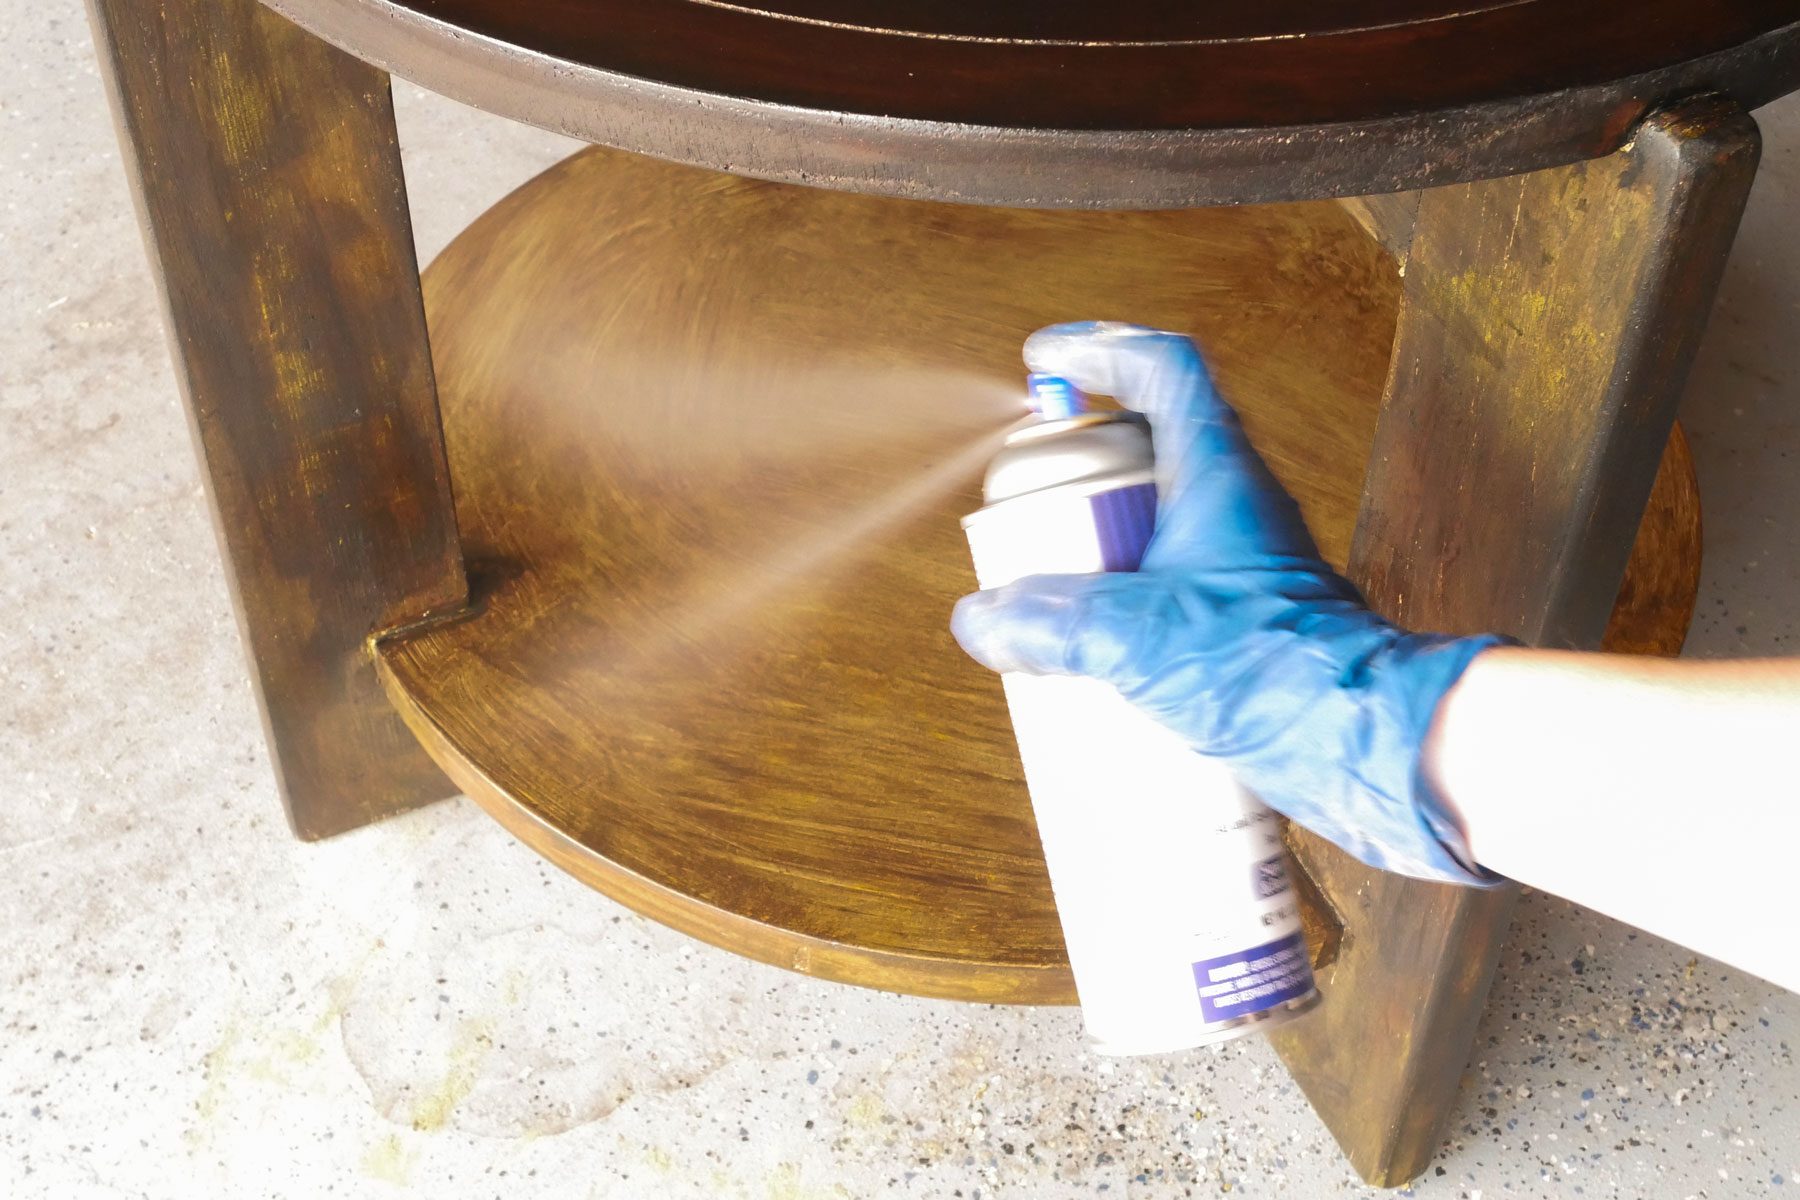 Spraying lacquer on a wooden table